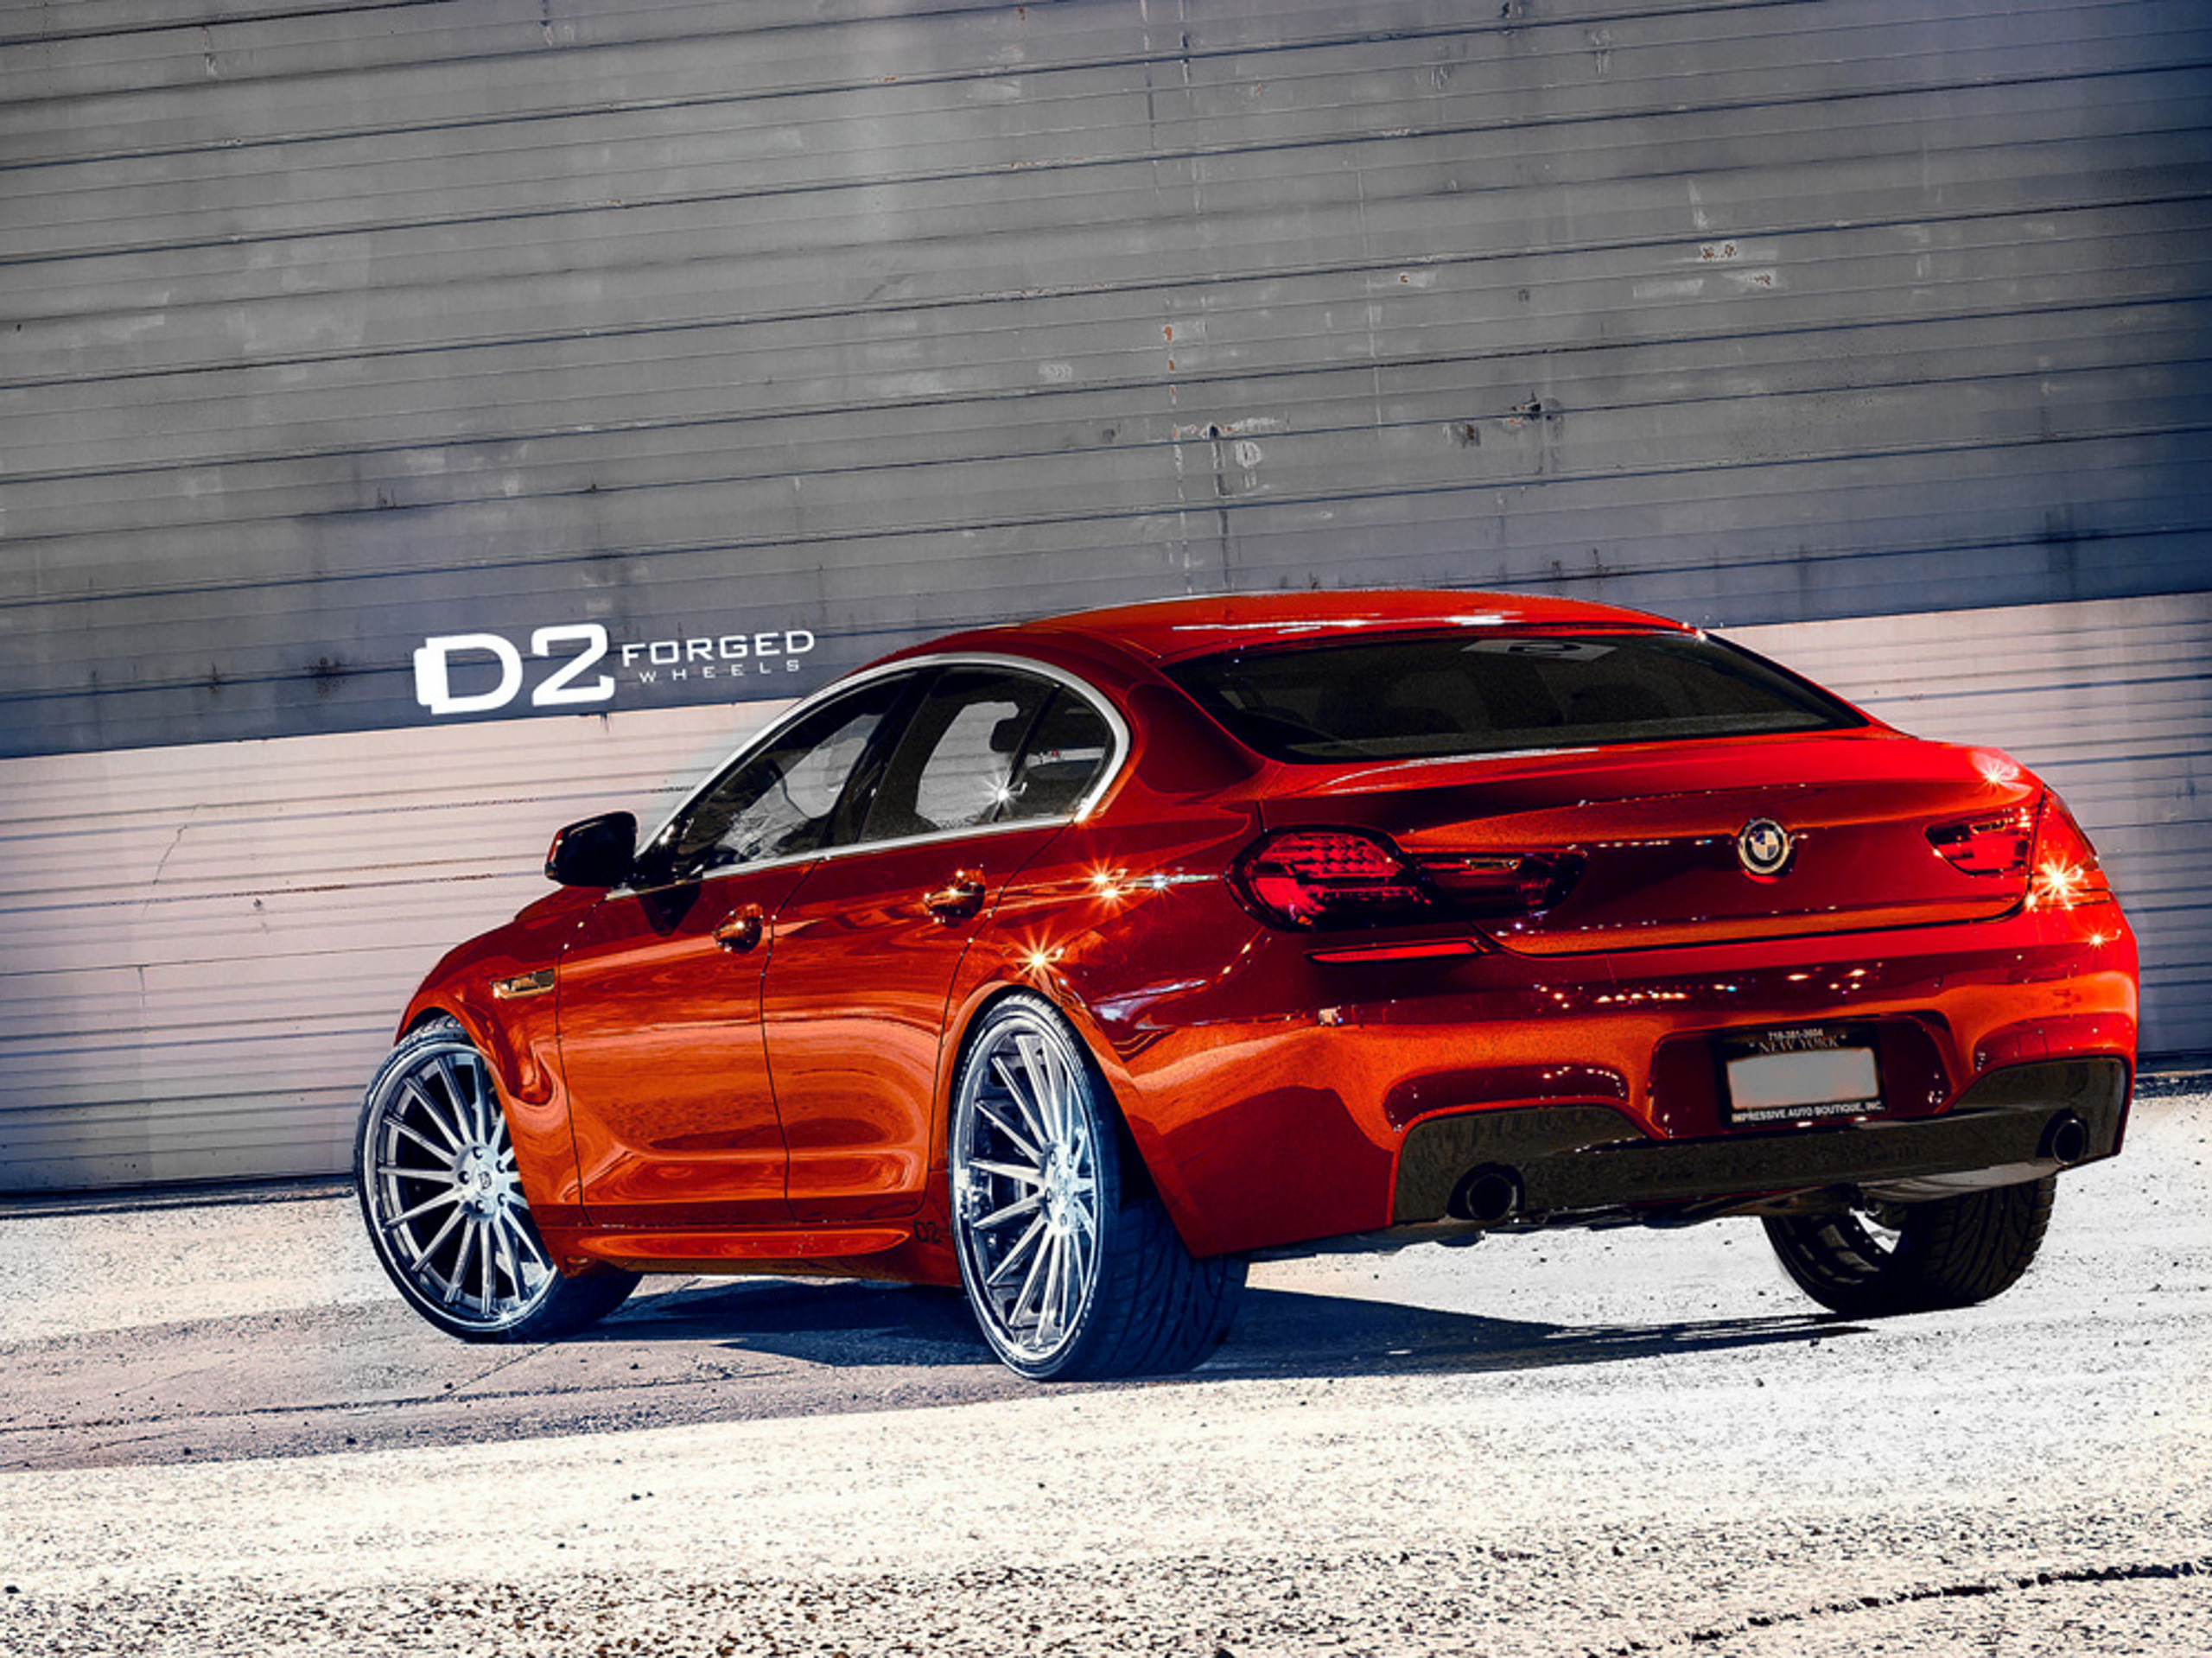 D2forged BMW 6er Gran Coupé Tuning: Neue Felgen in 22 Zoll